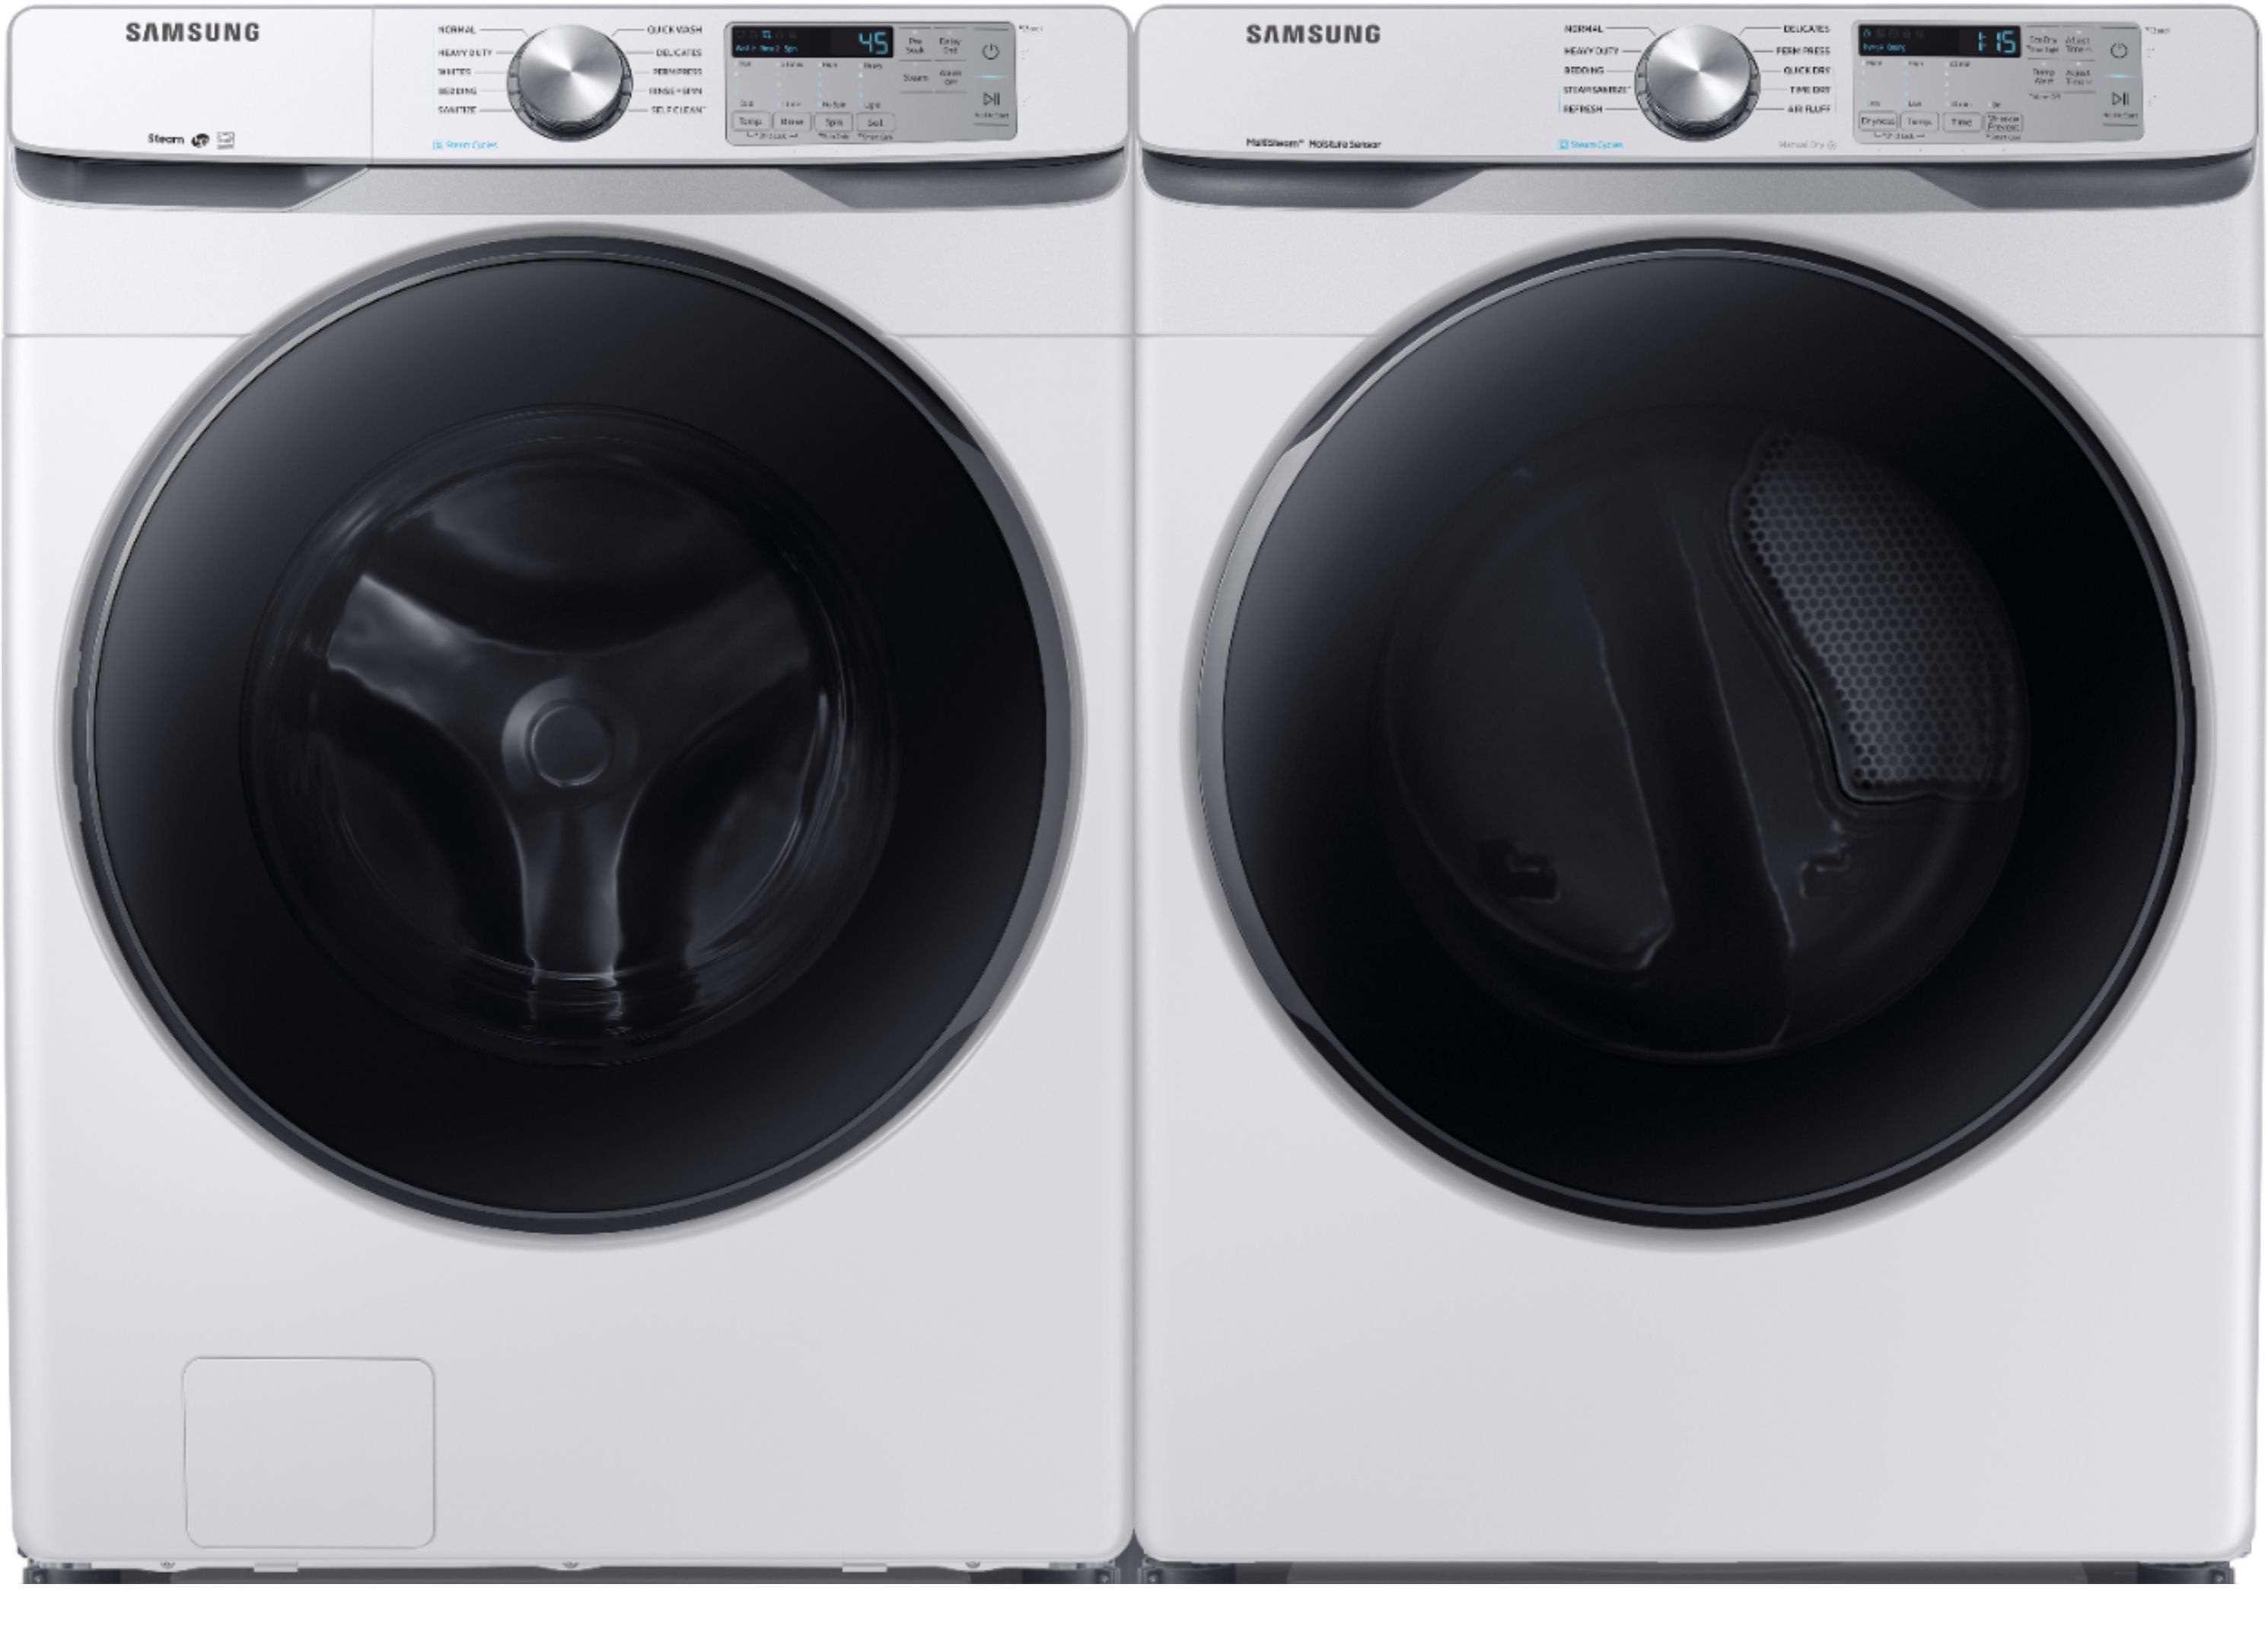 Samsung - 4.5 cu. ft. High Efficiency Stackable Front Load Washer & Samsung - 7.5 Cu. Ft. Gas Dryer with Steam and FlexDry - White